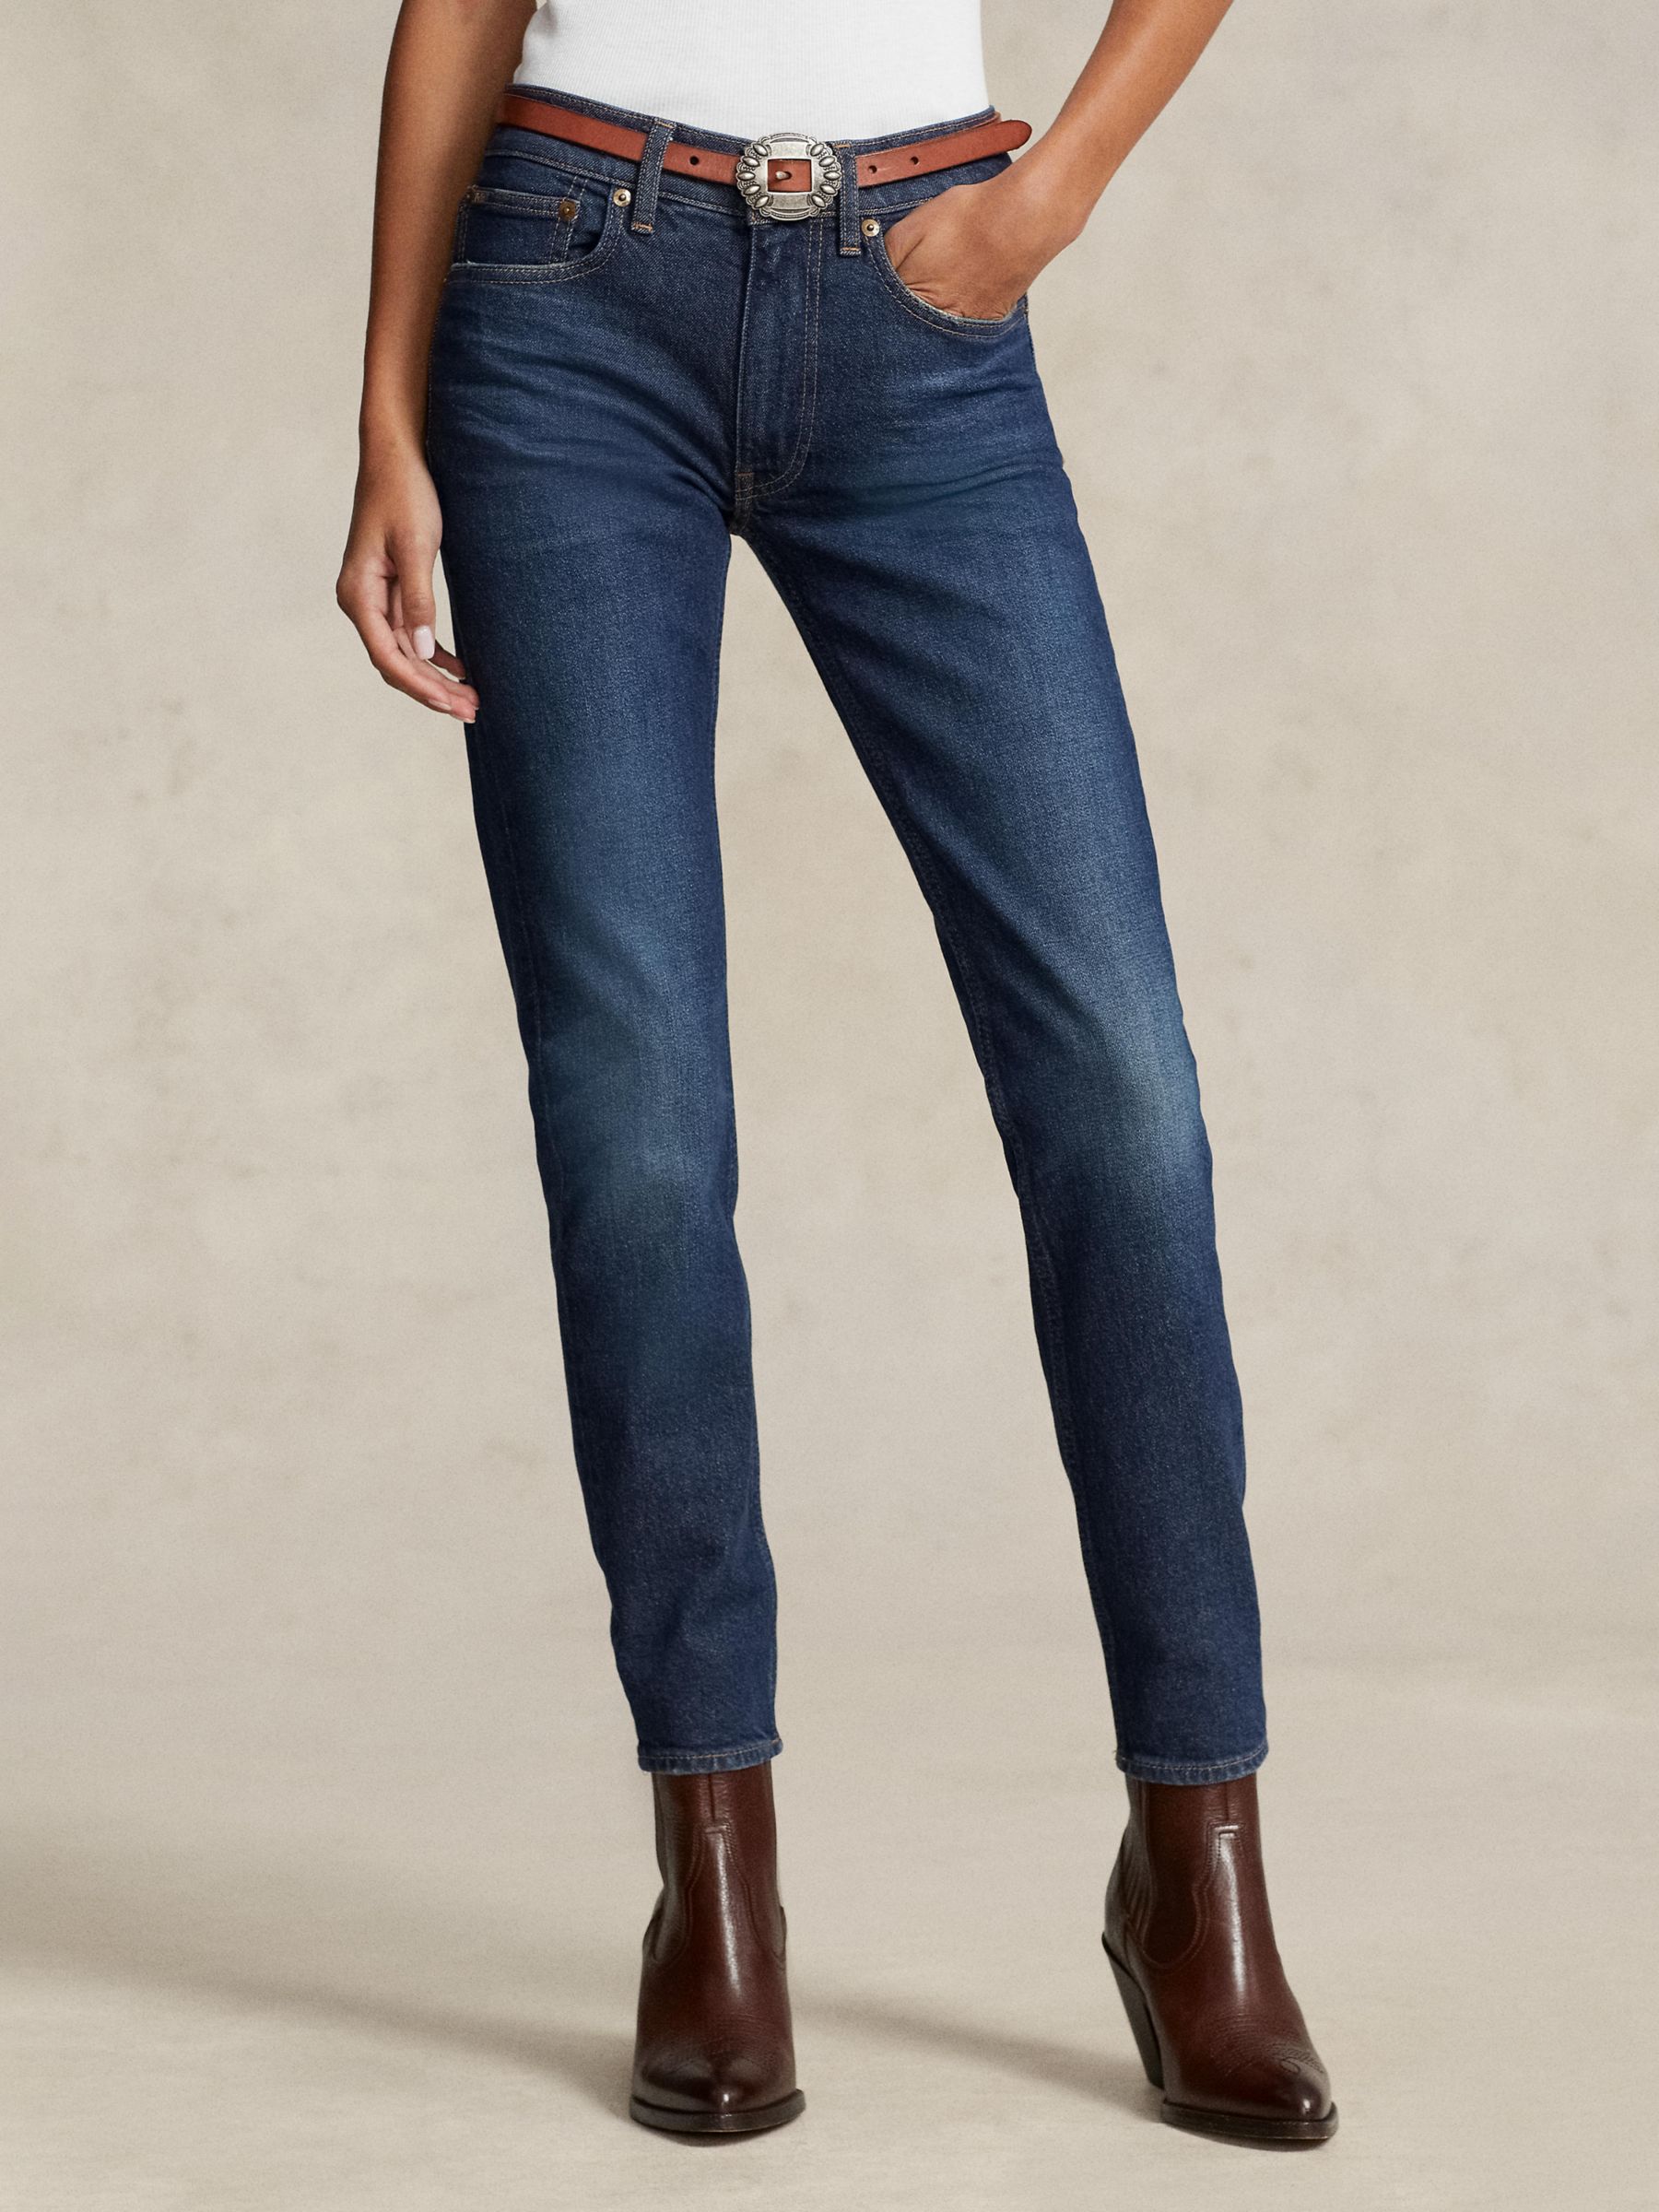 Polo Ralph Lauren Womens Jeans in Womens Clothing 